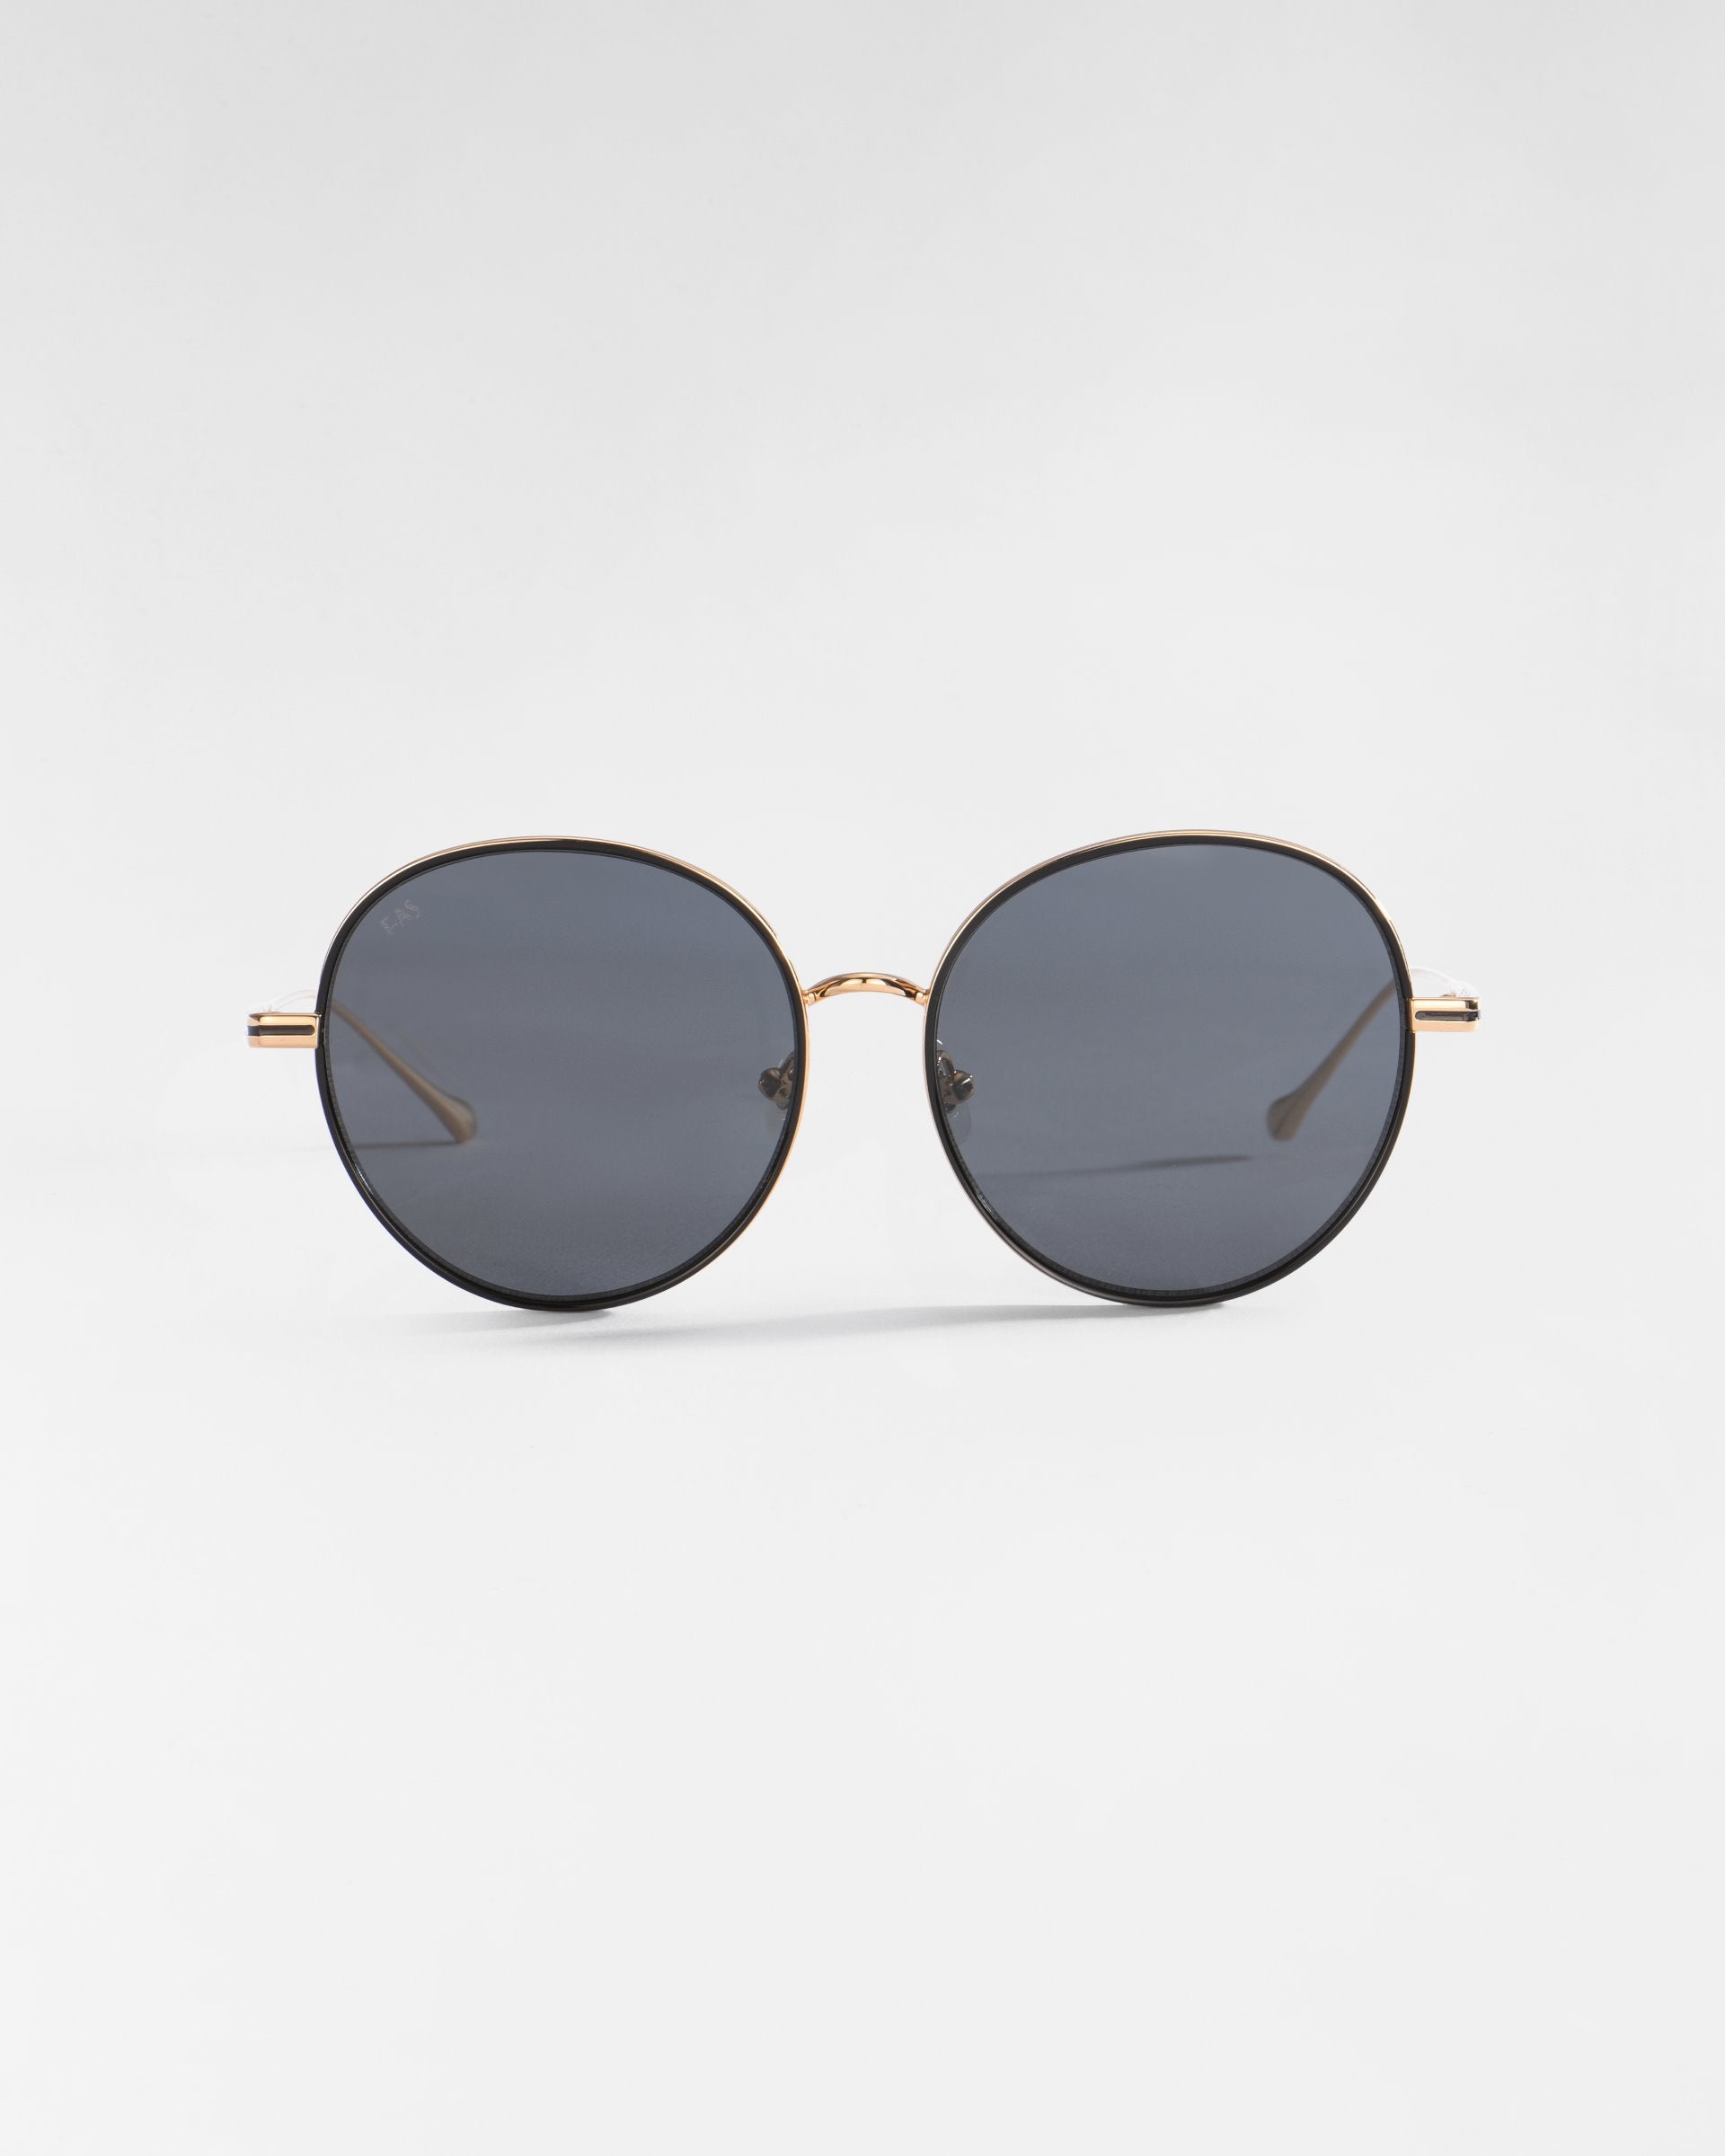 A pair of round sunglasses with thin 18-karat gold plated frames and dark grey lenses, adorned with jadestone nose pads, positioned against a plain white background. Product Name: Lemon, Brand Name: For Art's Sake®.